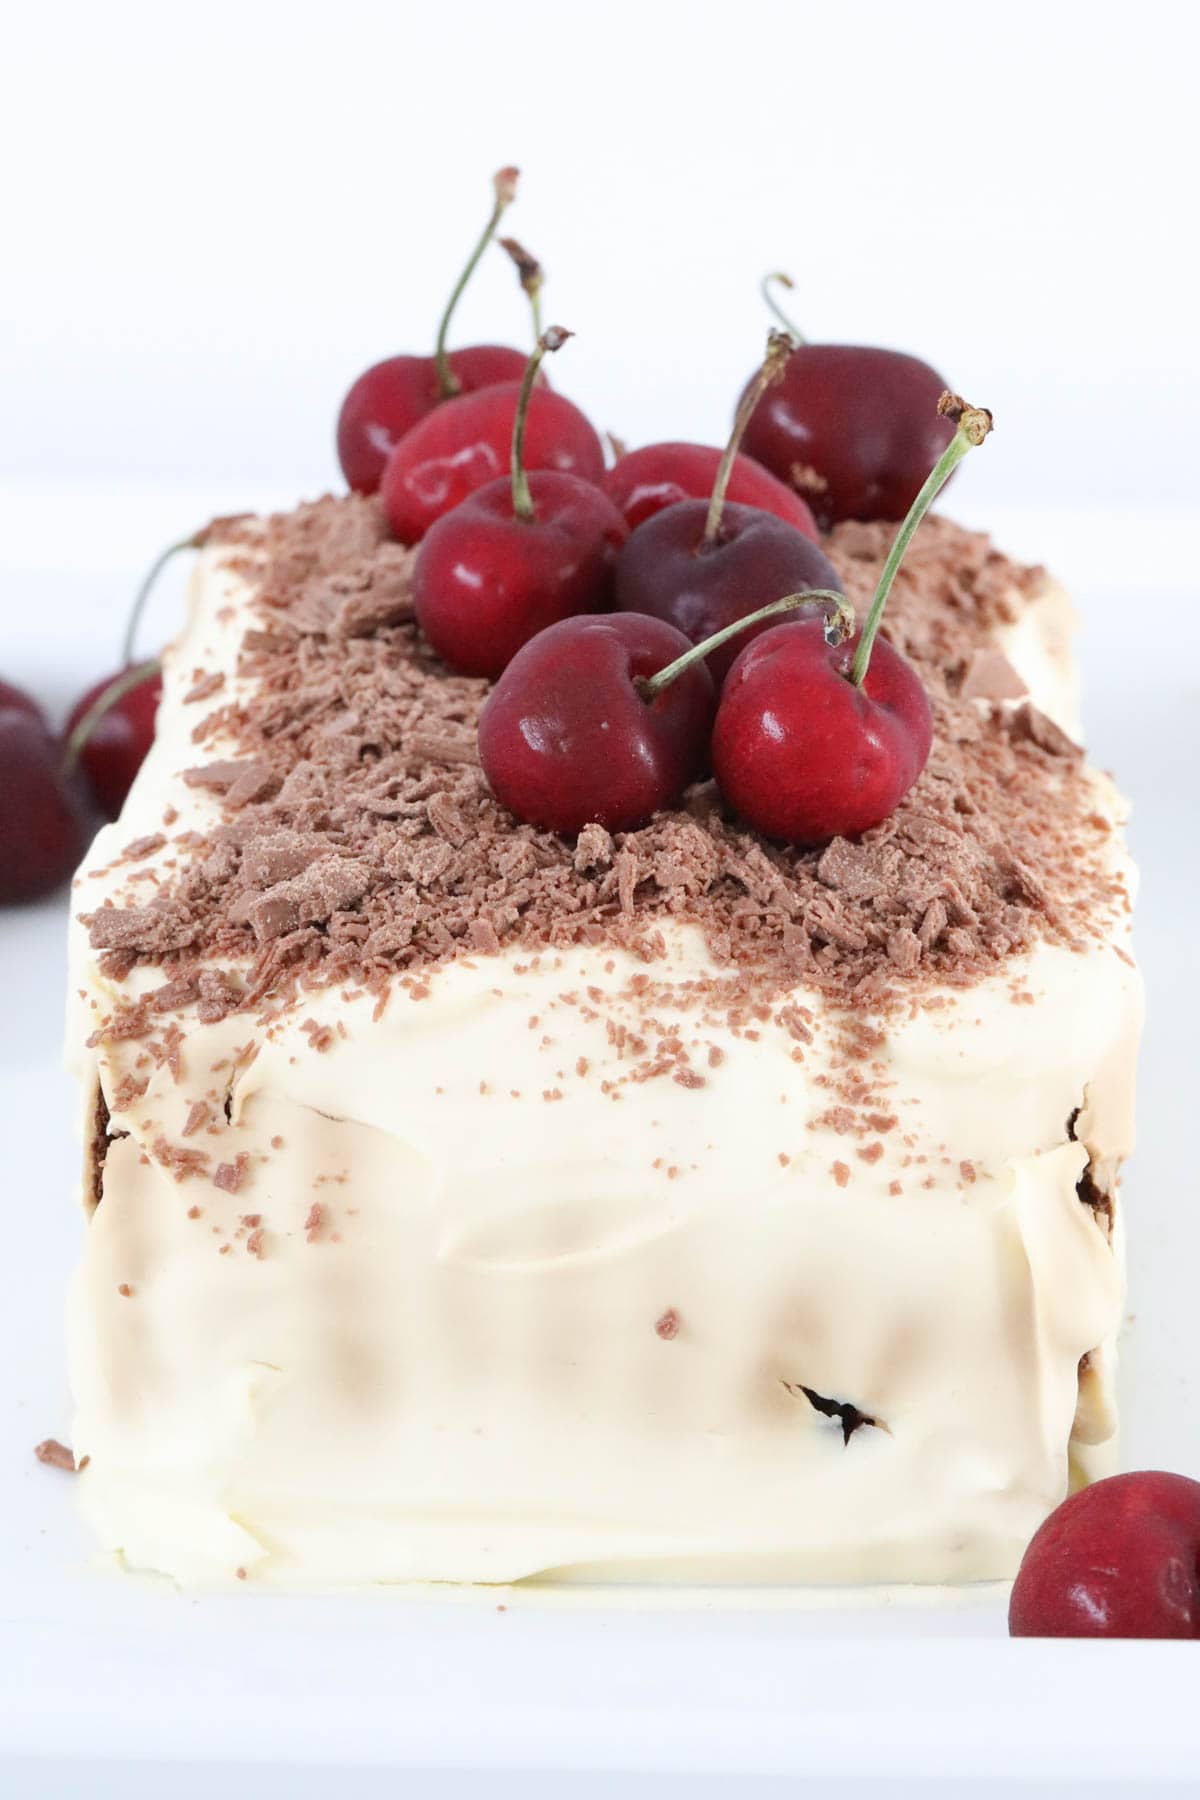 Cherries and chocolate on top of a cream covered dessert.